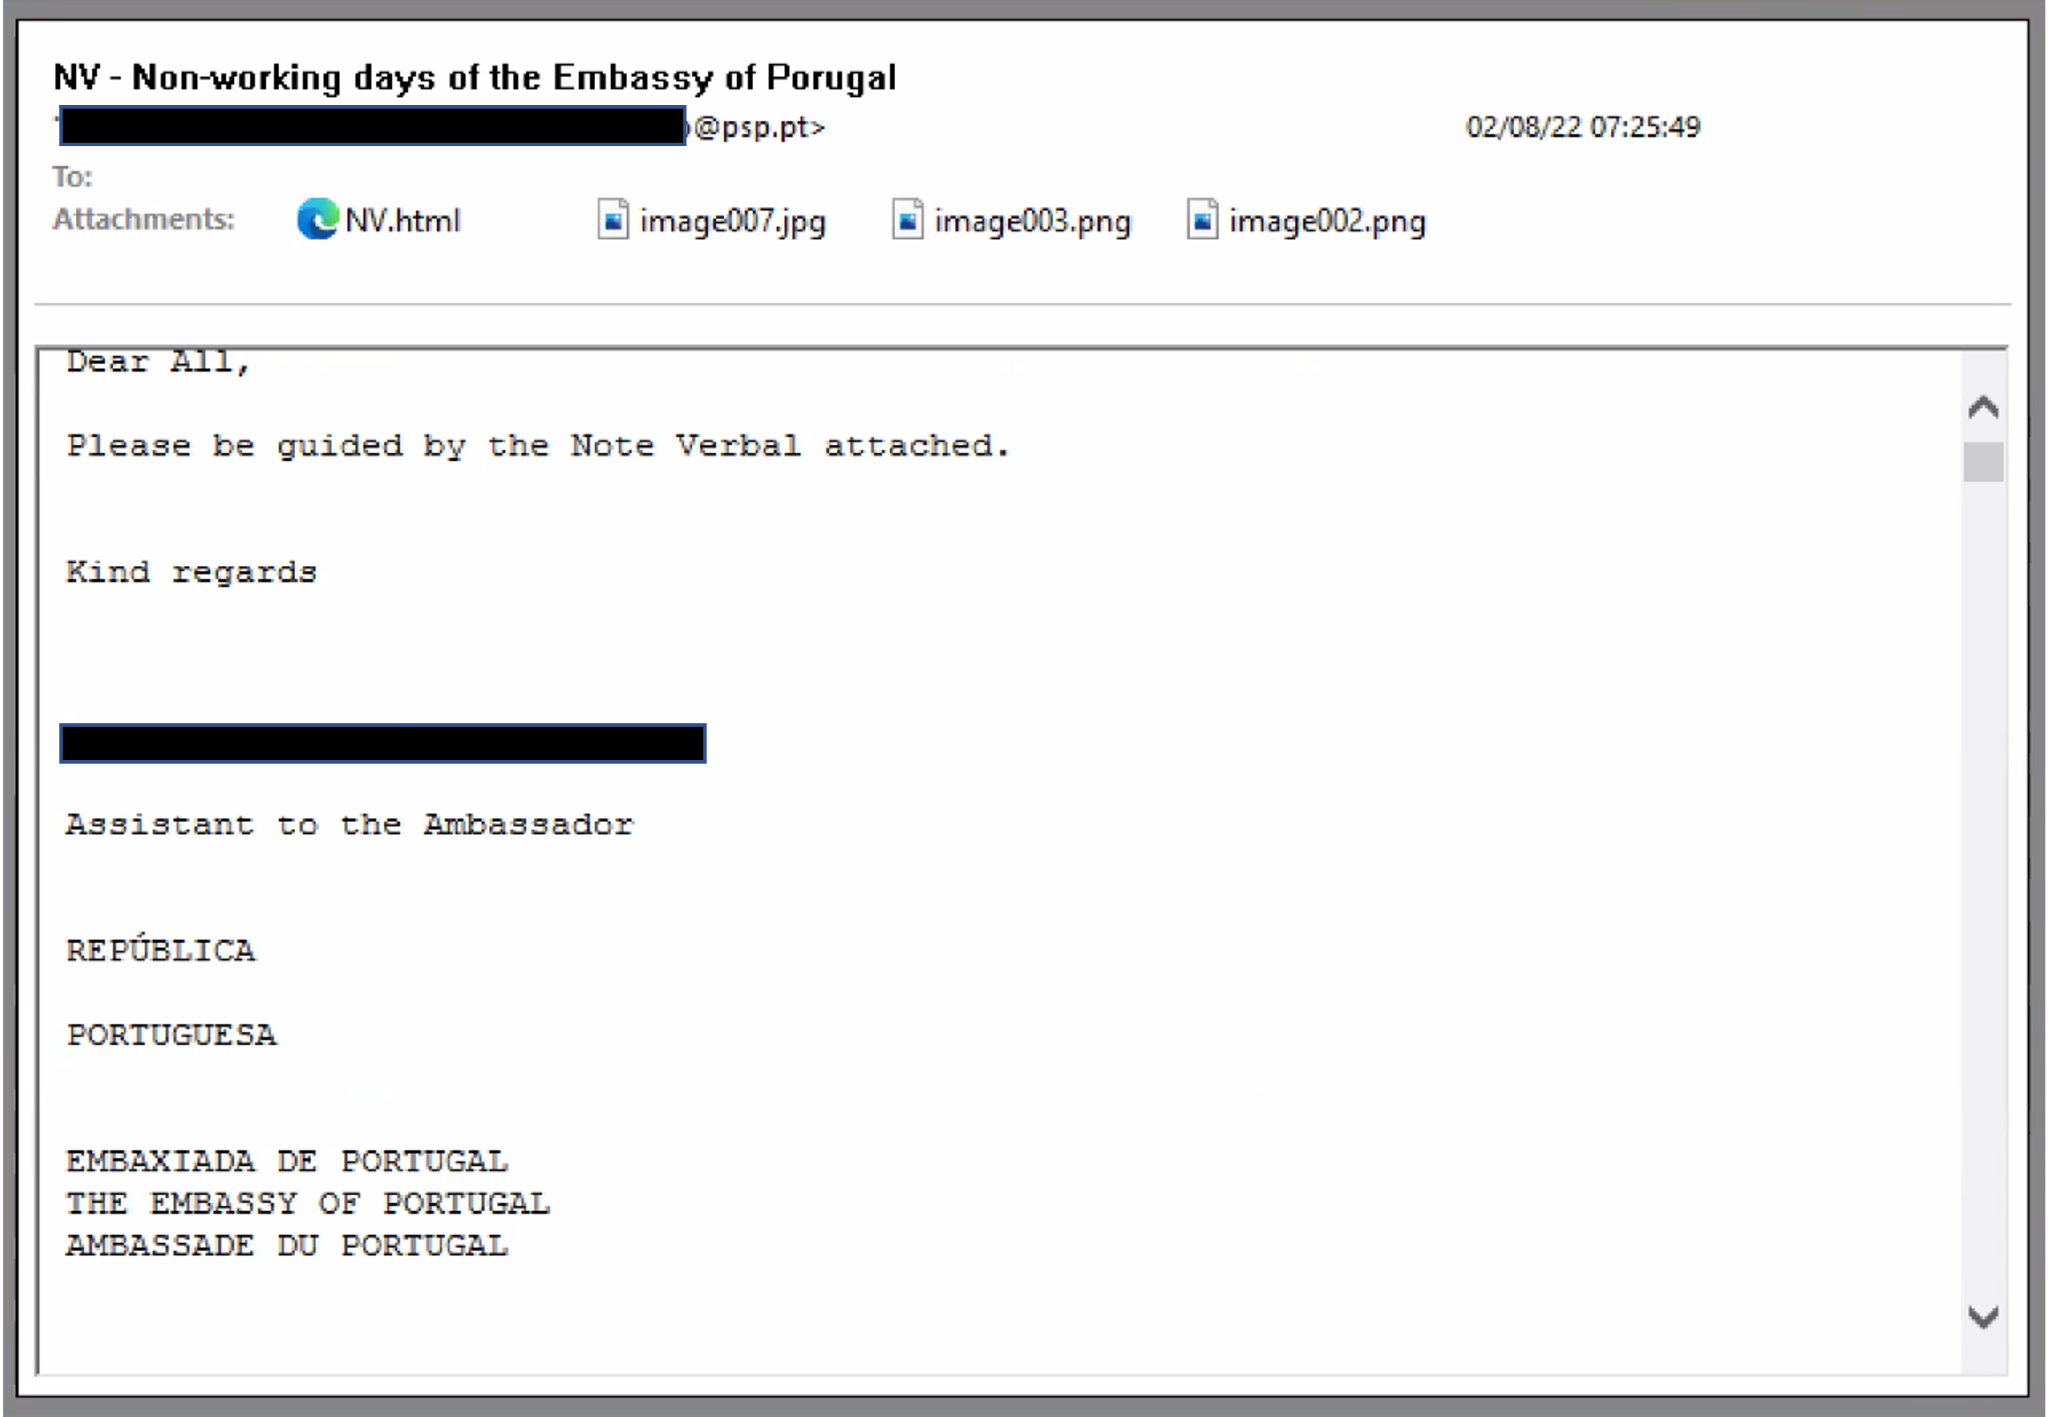 Email to Austrian Ministry of Foreign Affairs. The lure shown reads "NV - Non-working days of the Embassy of Portugal" and originated from a potentially compromised Portuguese government email account.